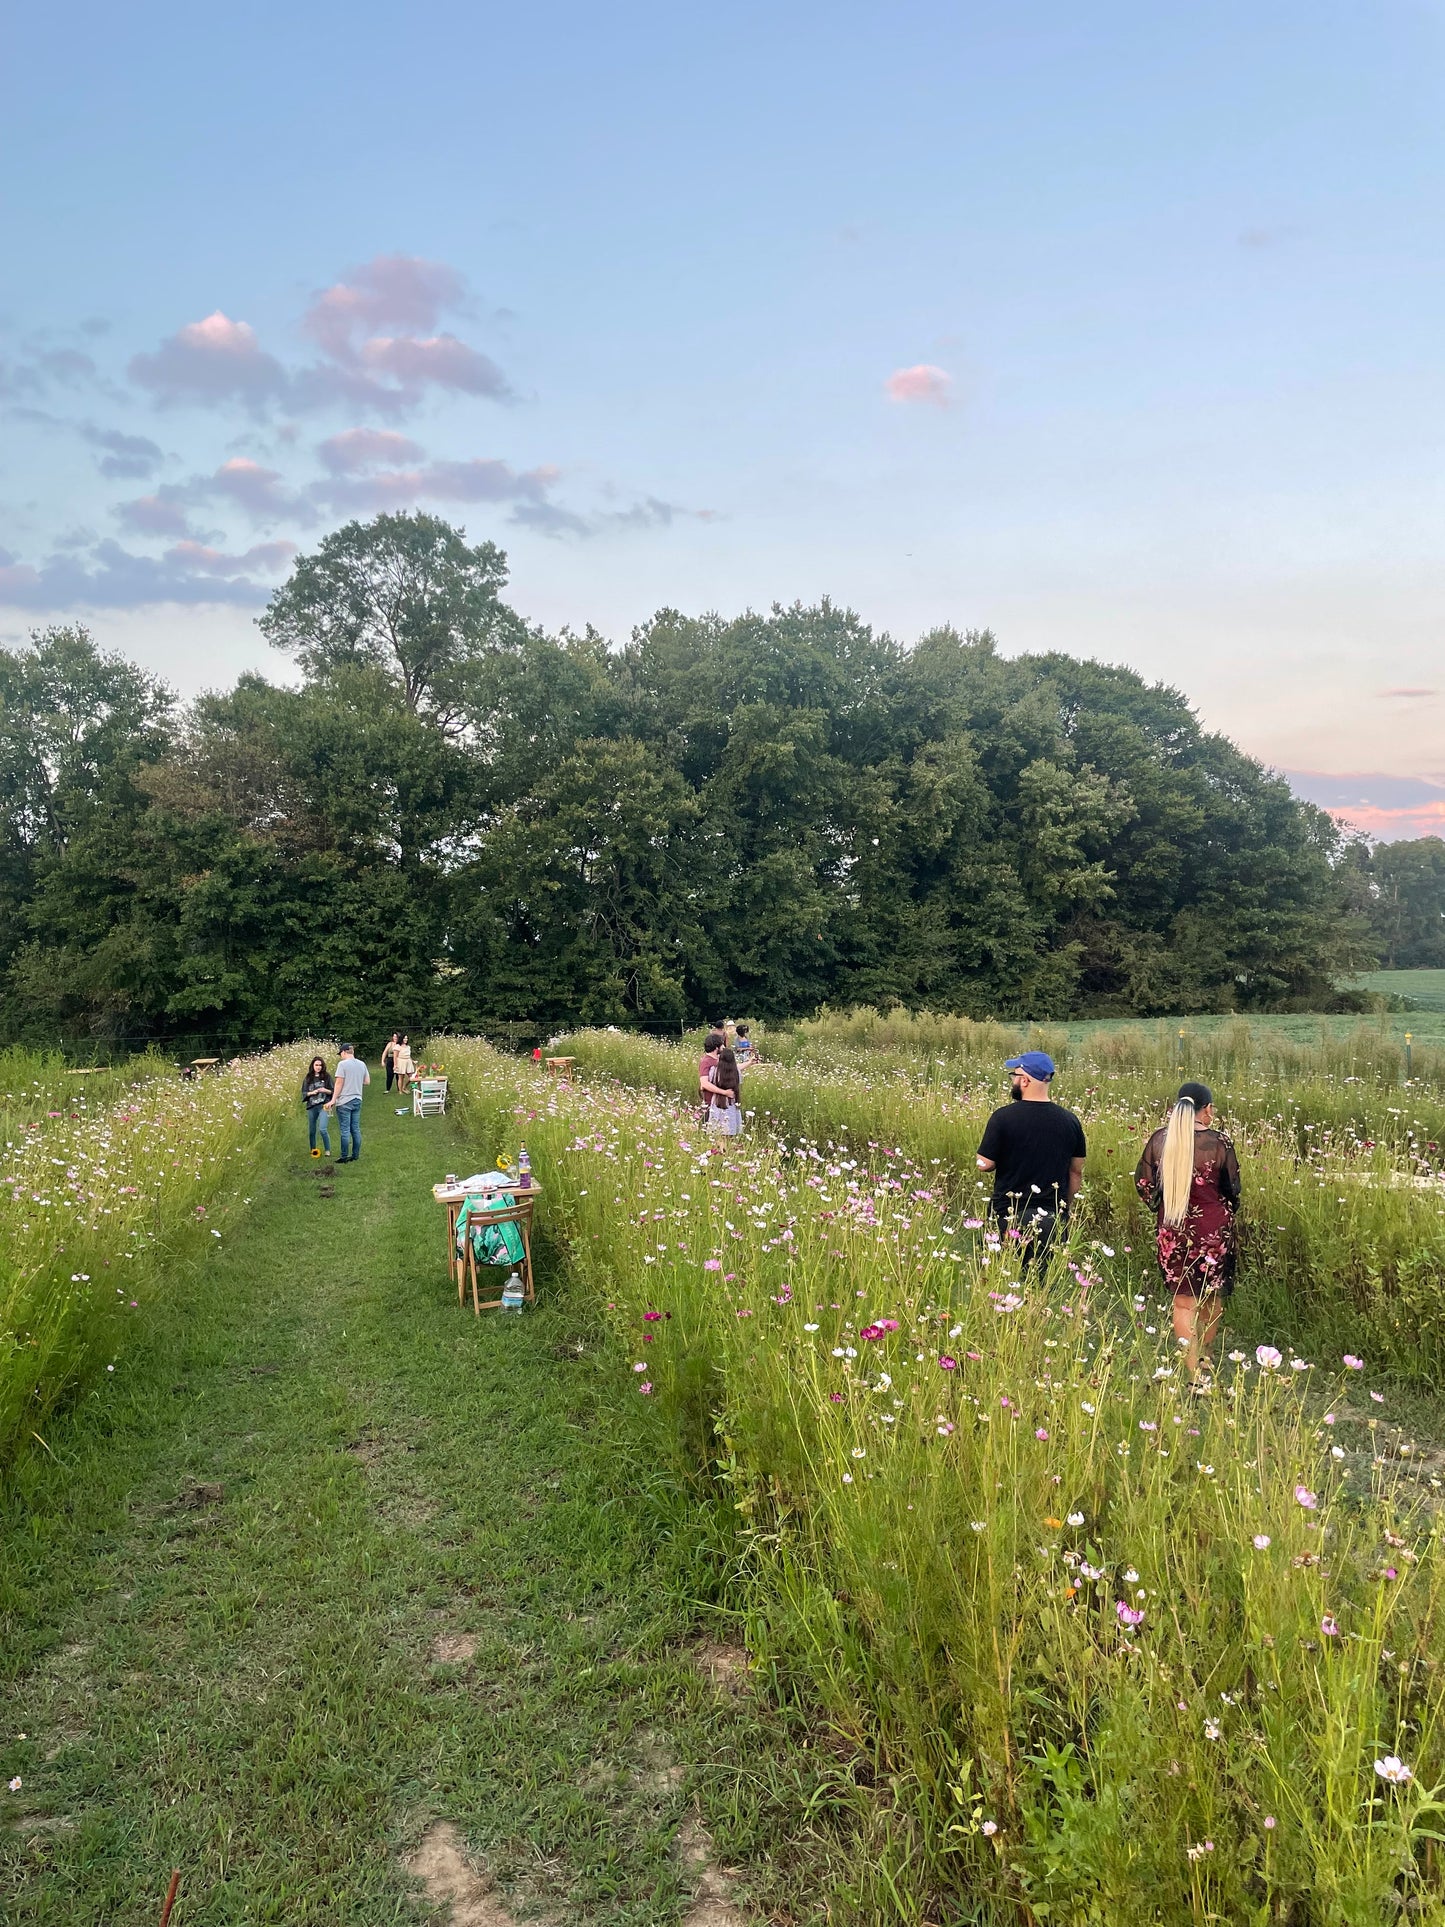 BYOB Date Night and Picnic Day: Sips & Sunsets in the Flower Fields